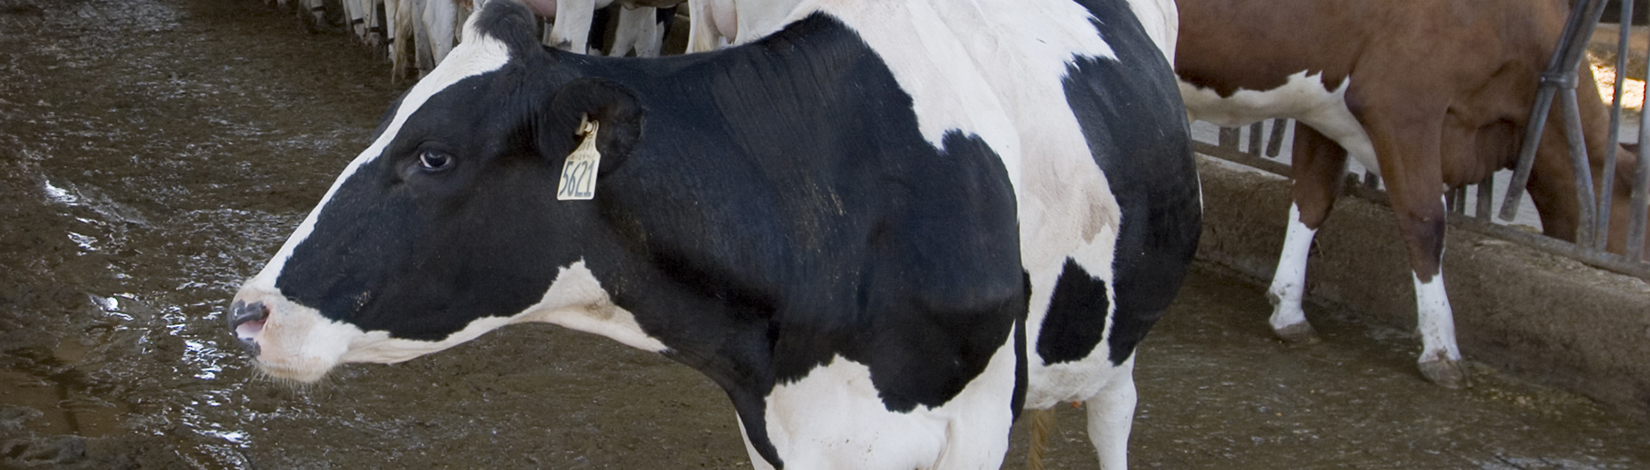 closeup side-view photo of black and white cow, with brown cow in background